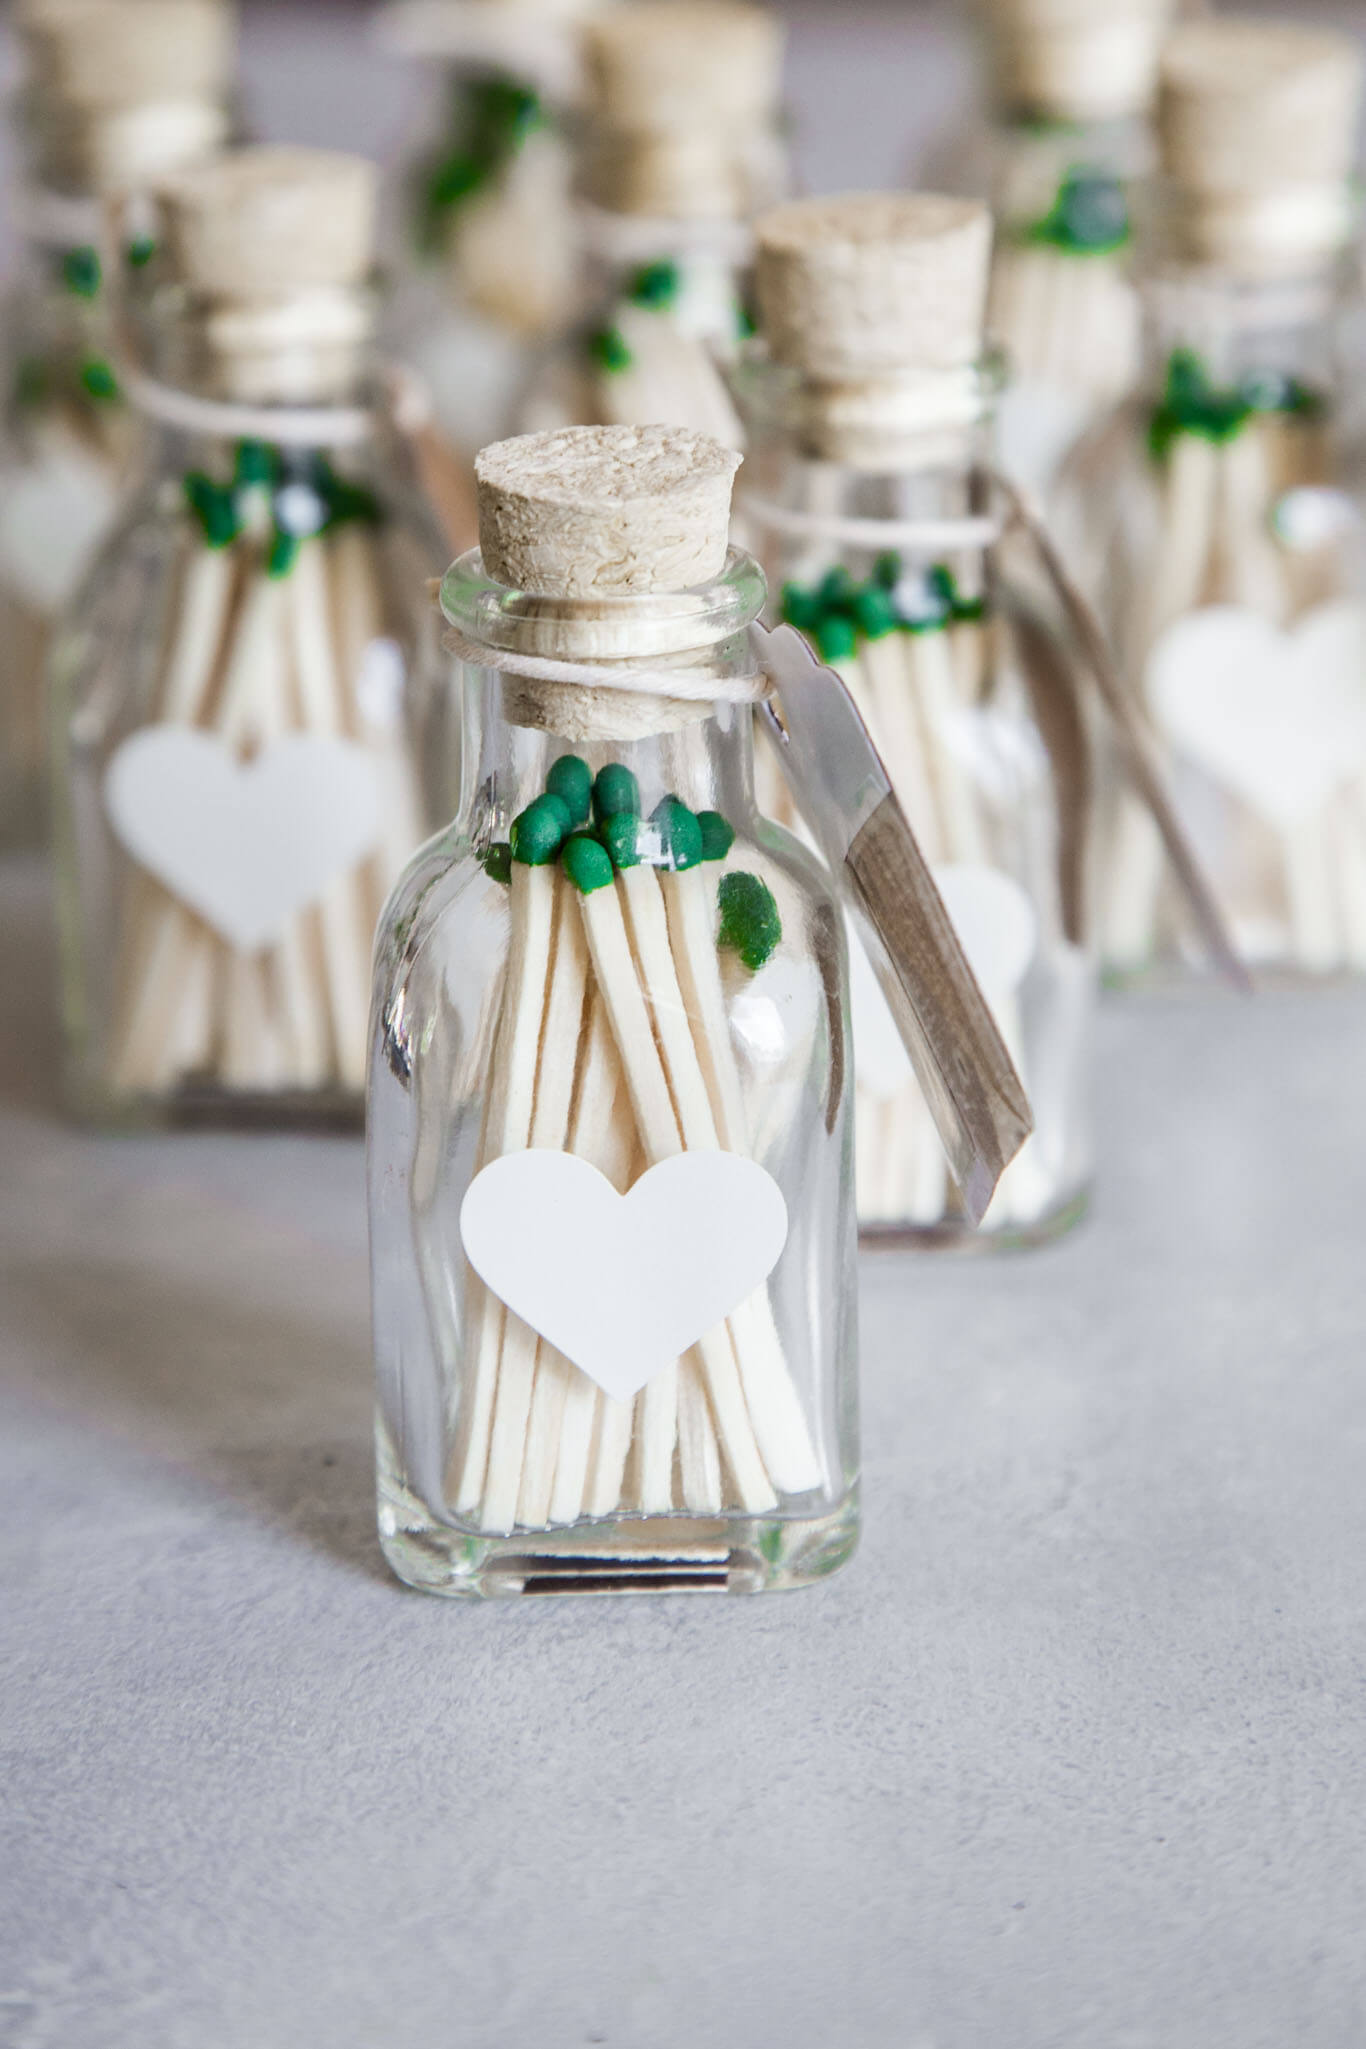 Learn to make your own DIY wedding favors. These match wedding favors are  so cute